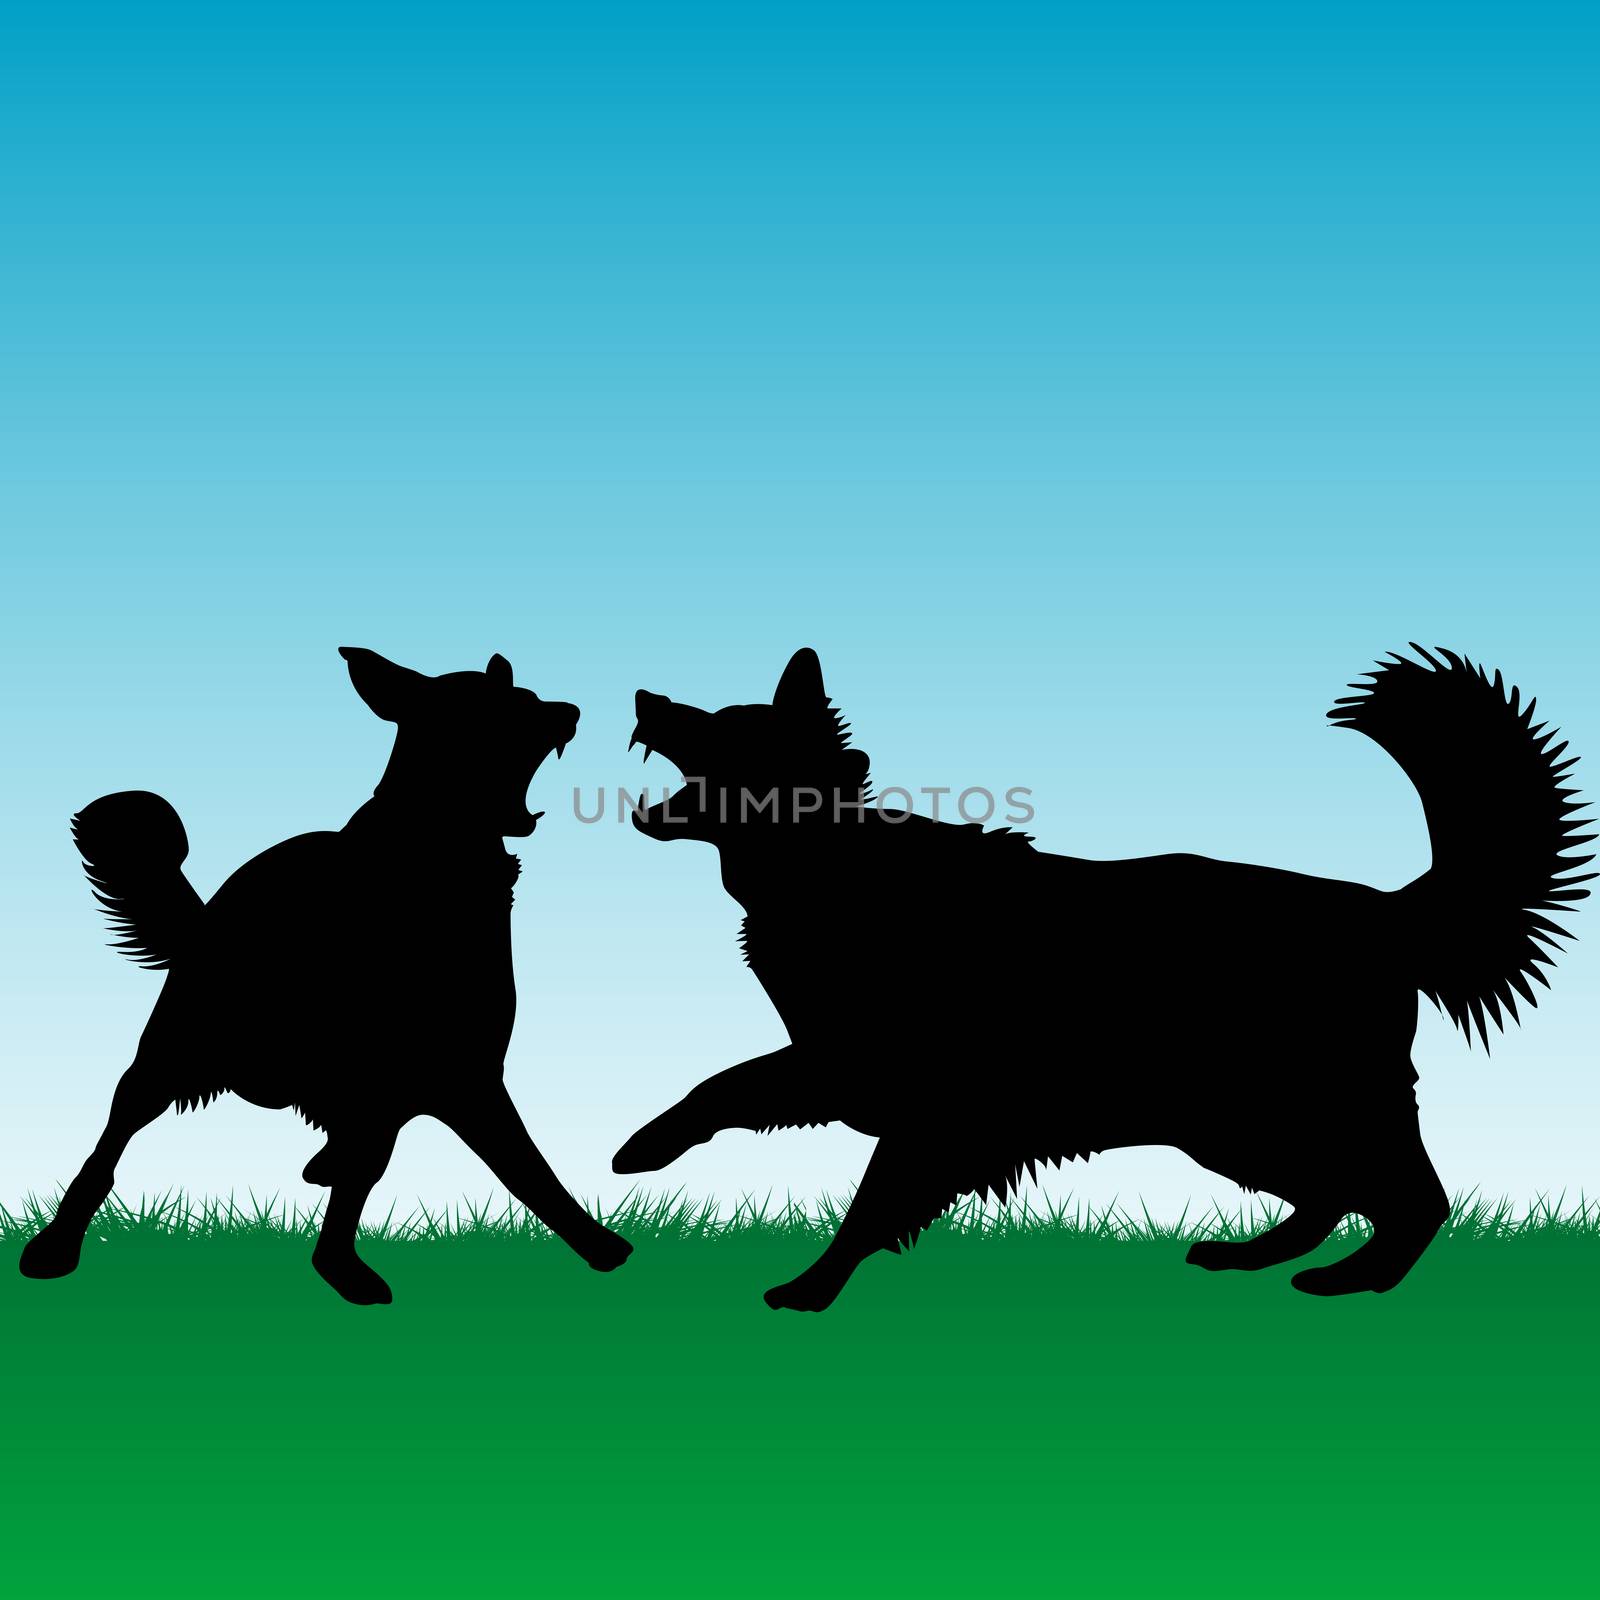 Dogs fighting or playing outdoors